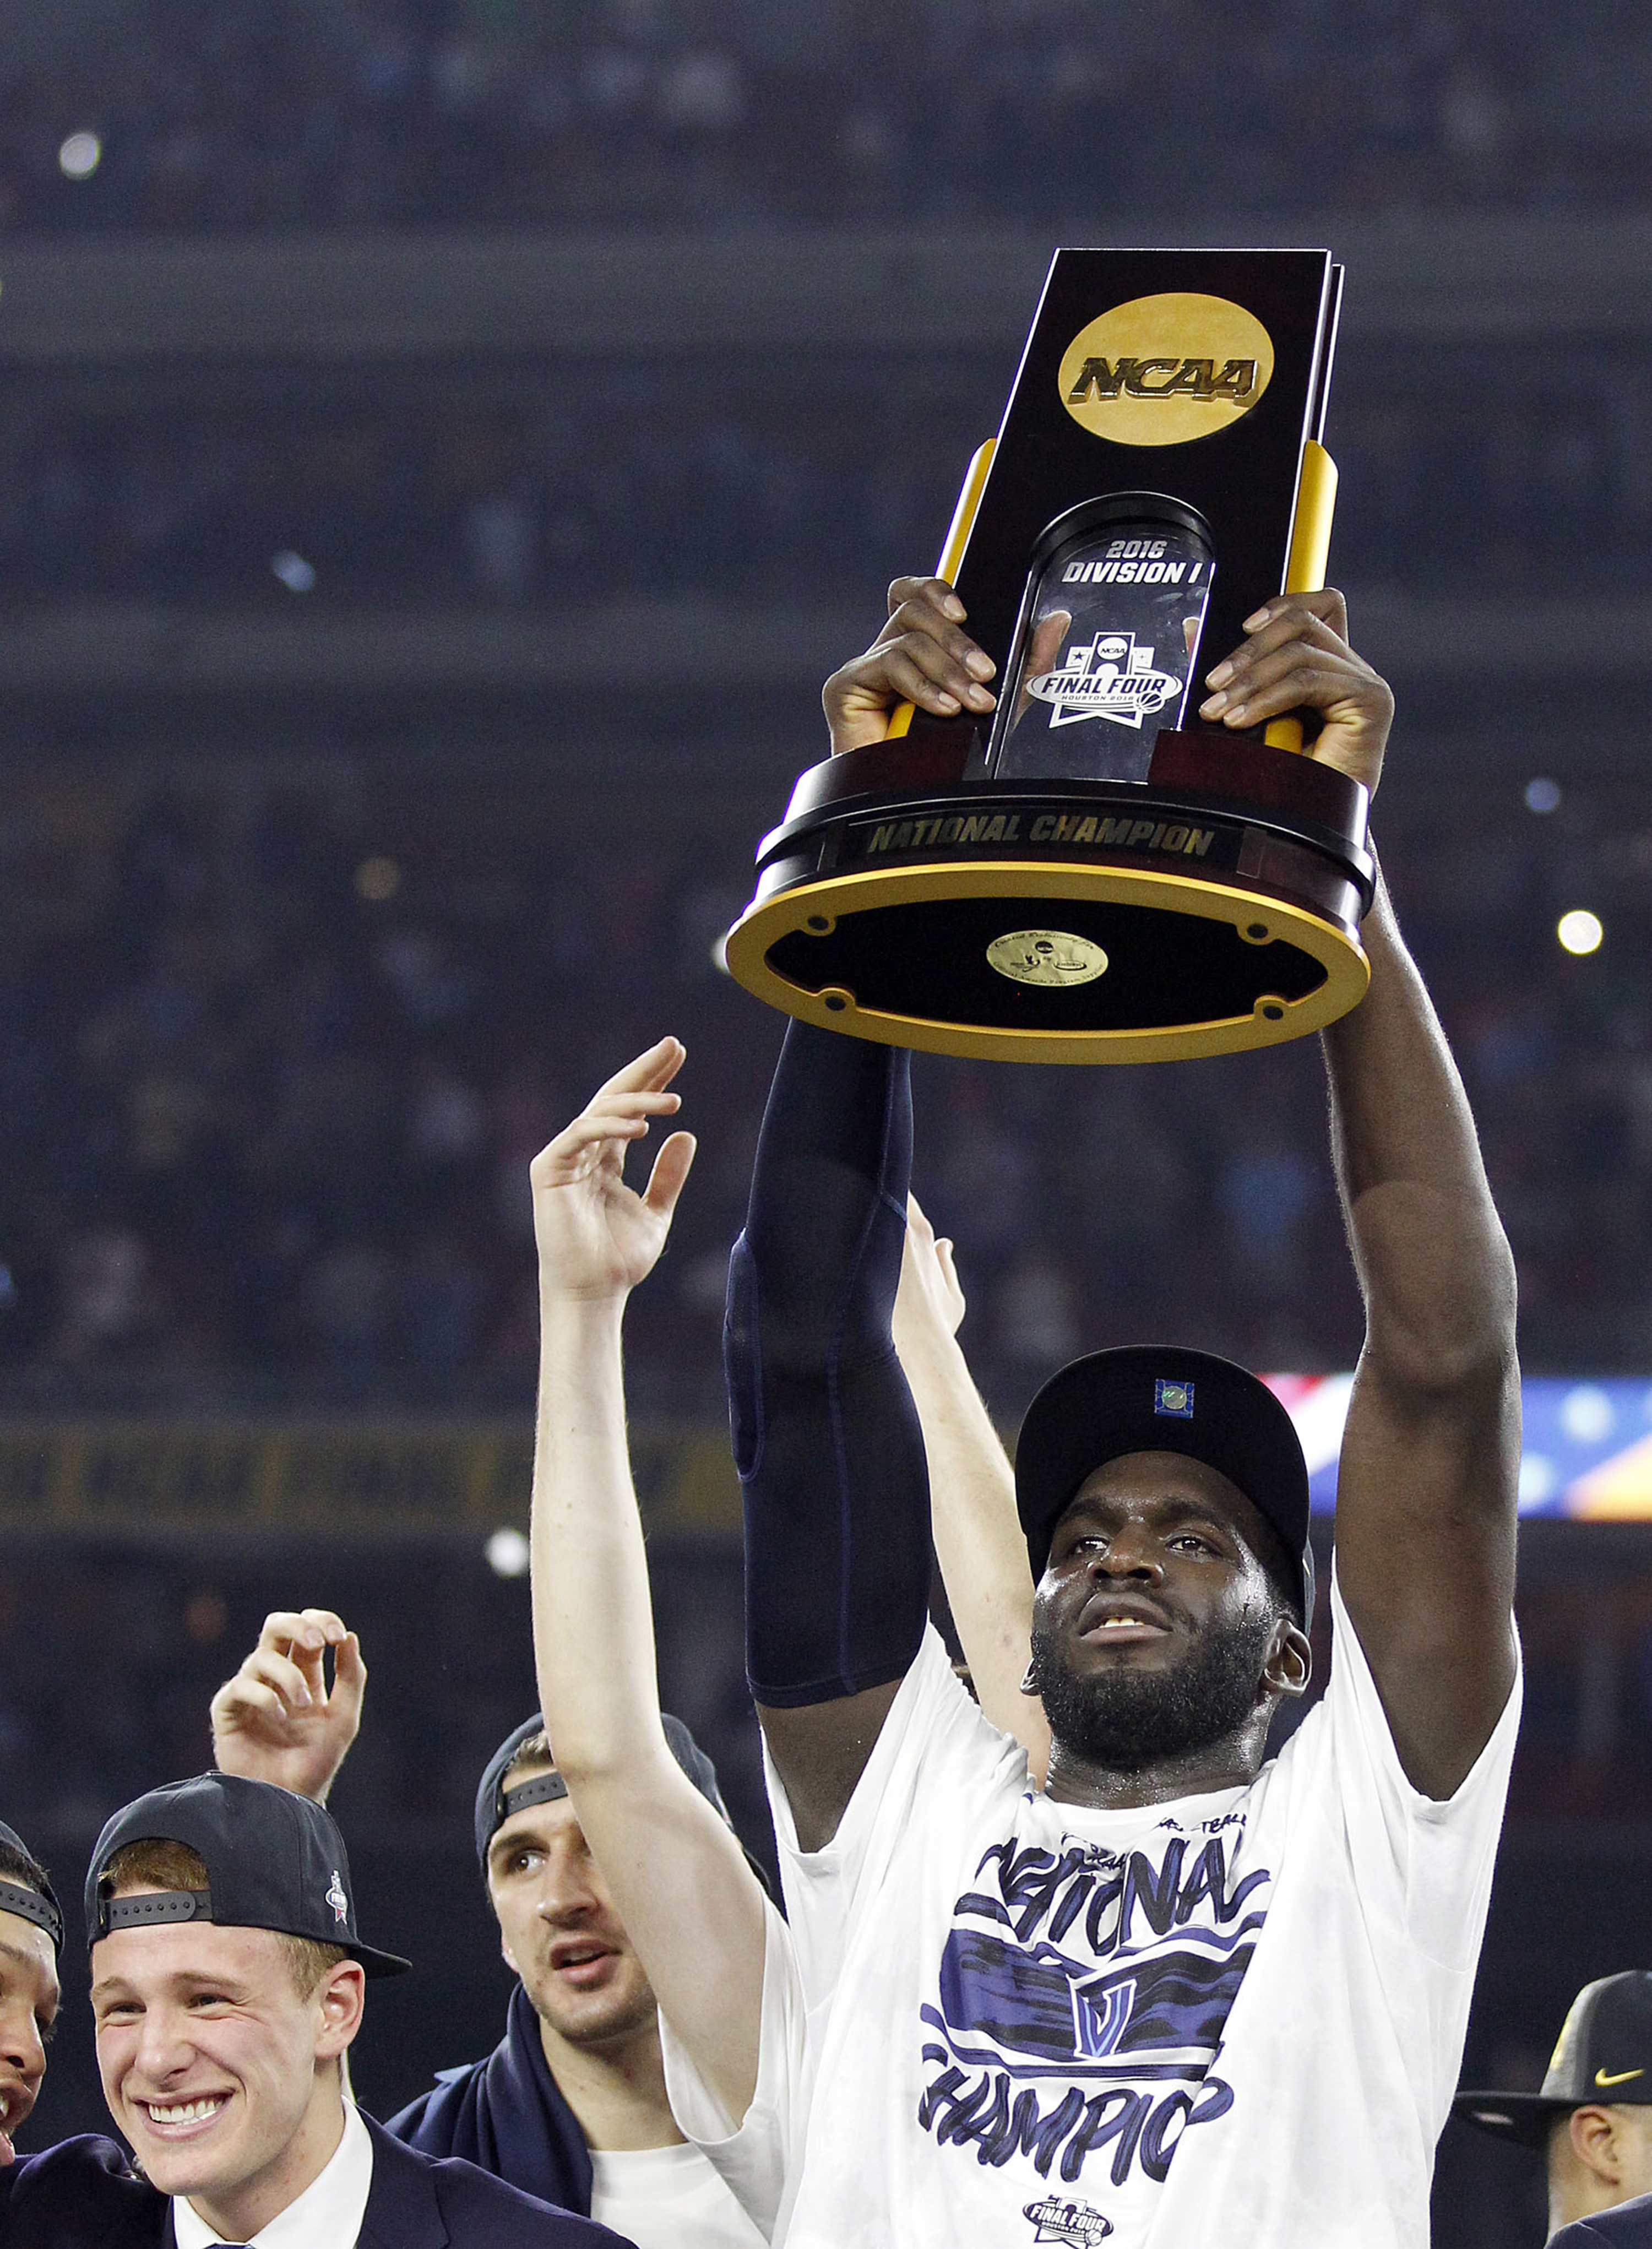 Villanova Wildcats on Quest to Repeat as Champs